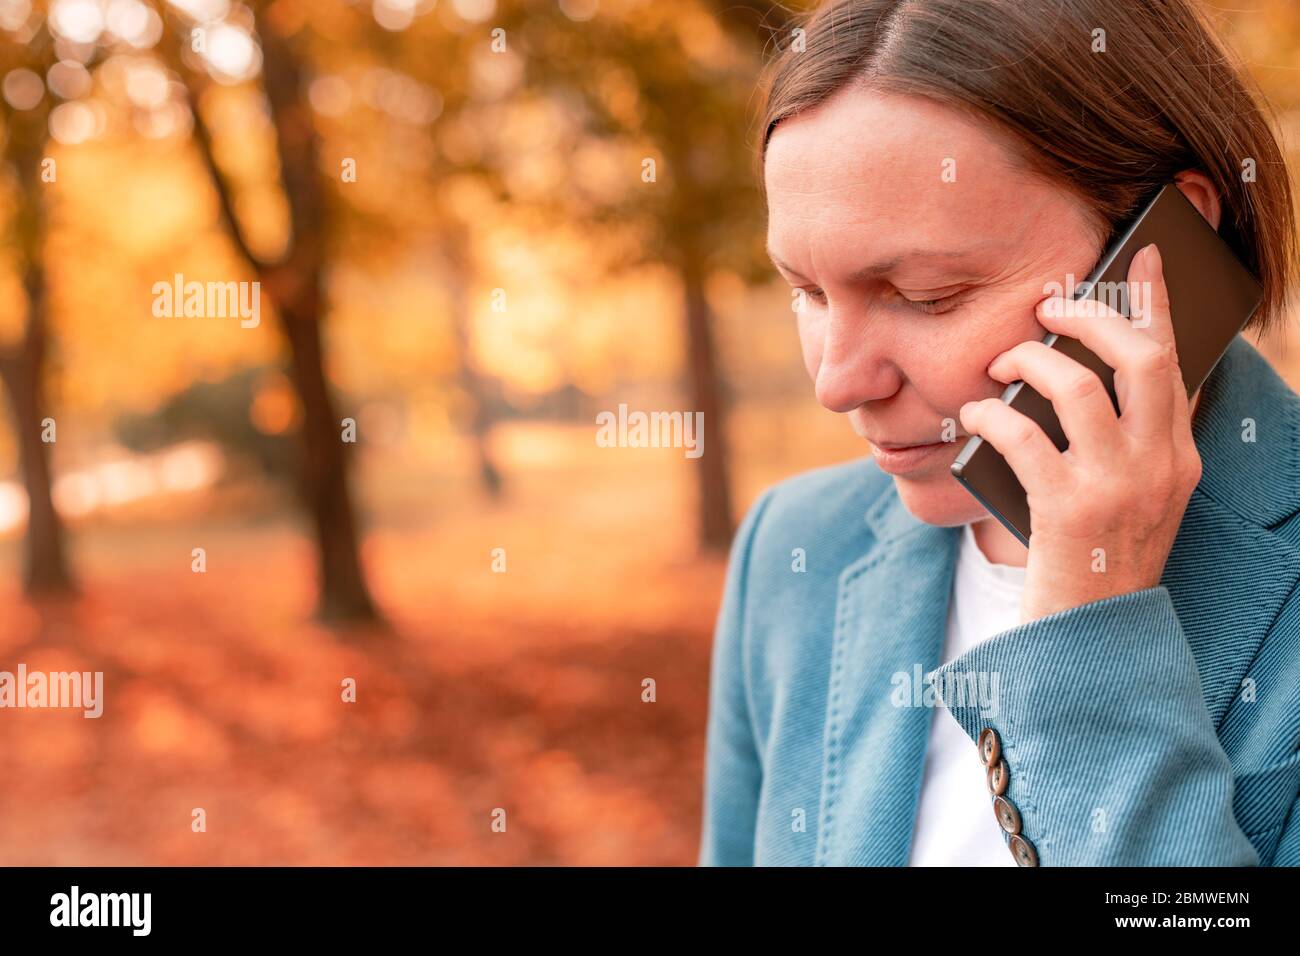 Businesswoman talking on mobile phone in autumn park, portrait of adult caucasian business person during telephone conversation Stock Photo